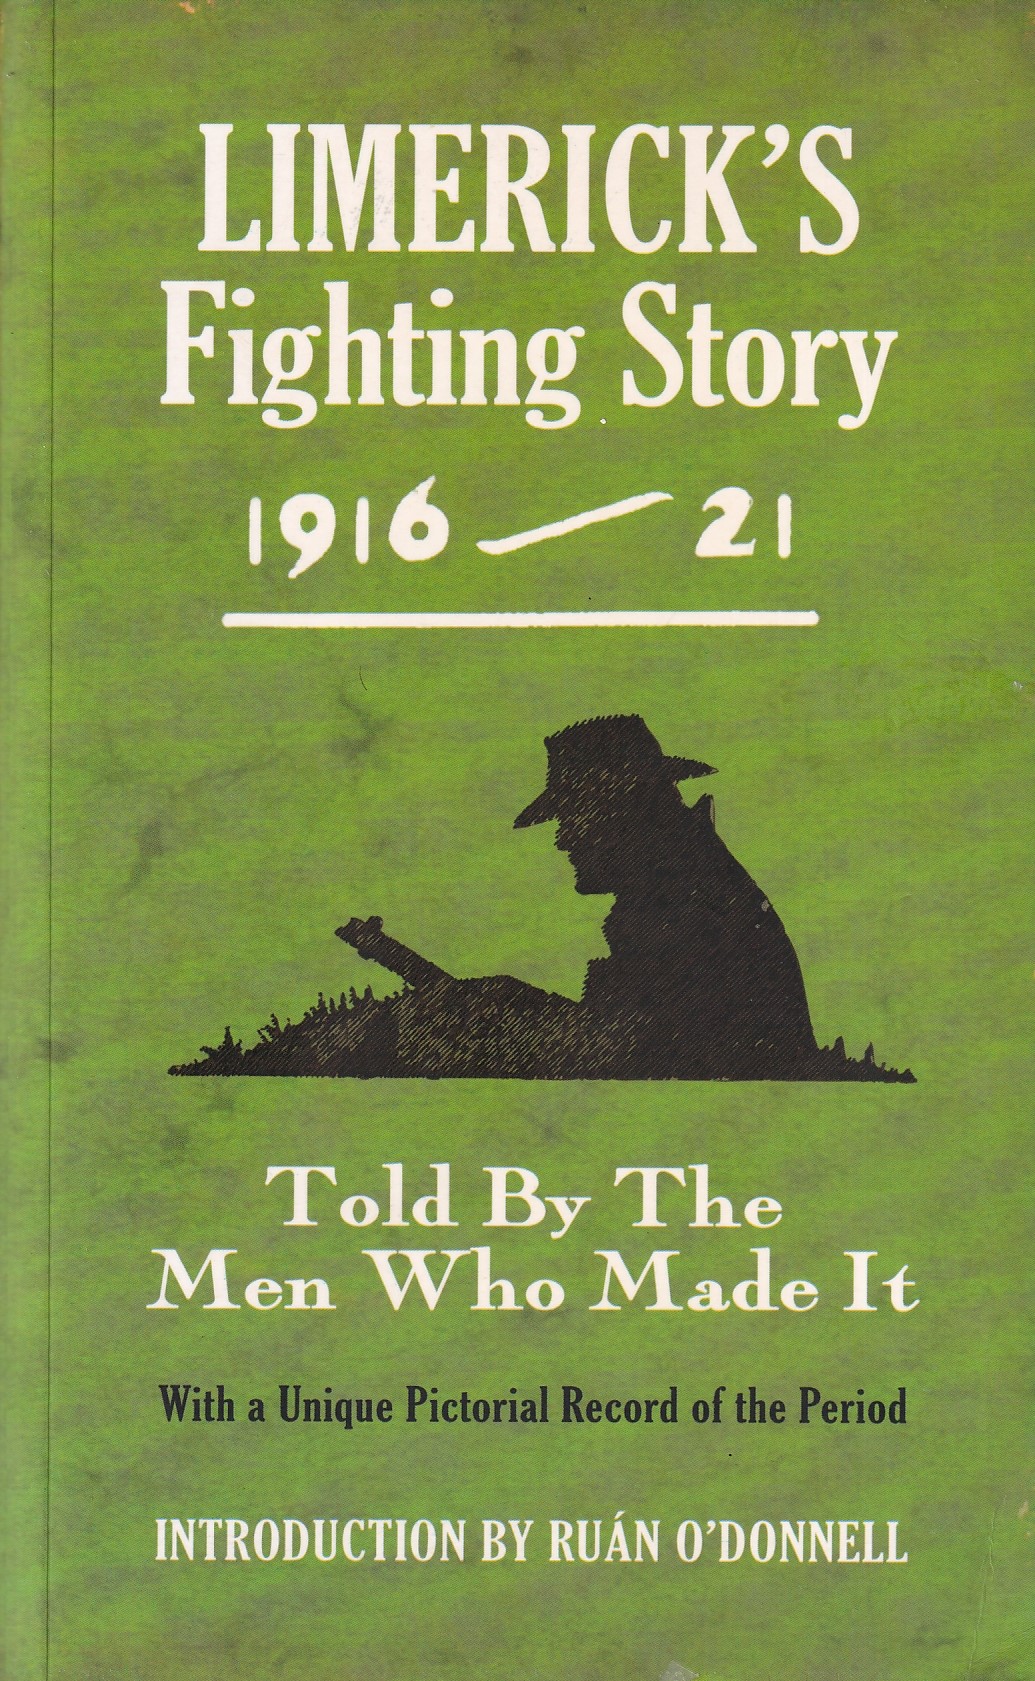 Limerick’s Fighting Story 1916-21: Told by the Men Who Made it by Ruán O'Donnell